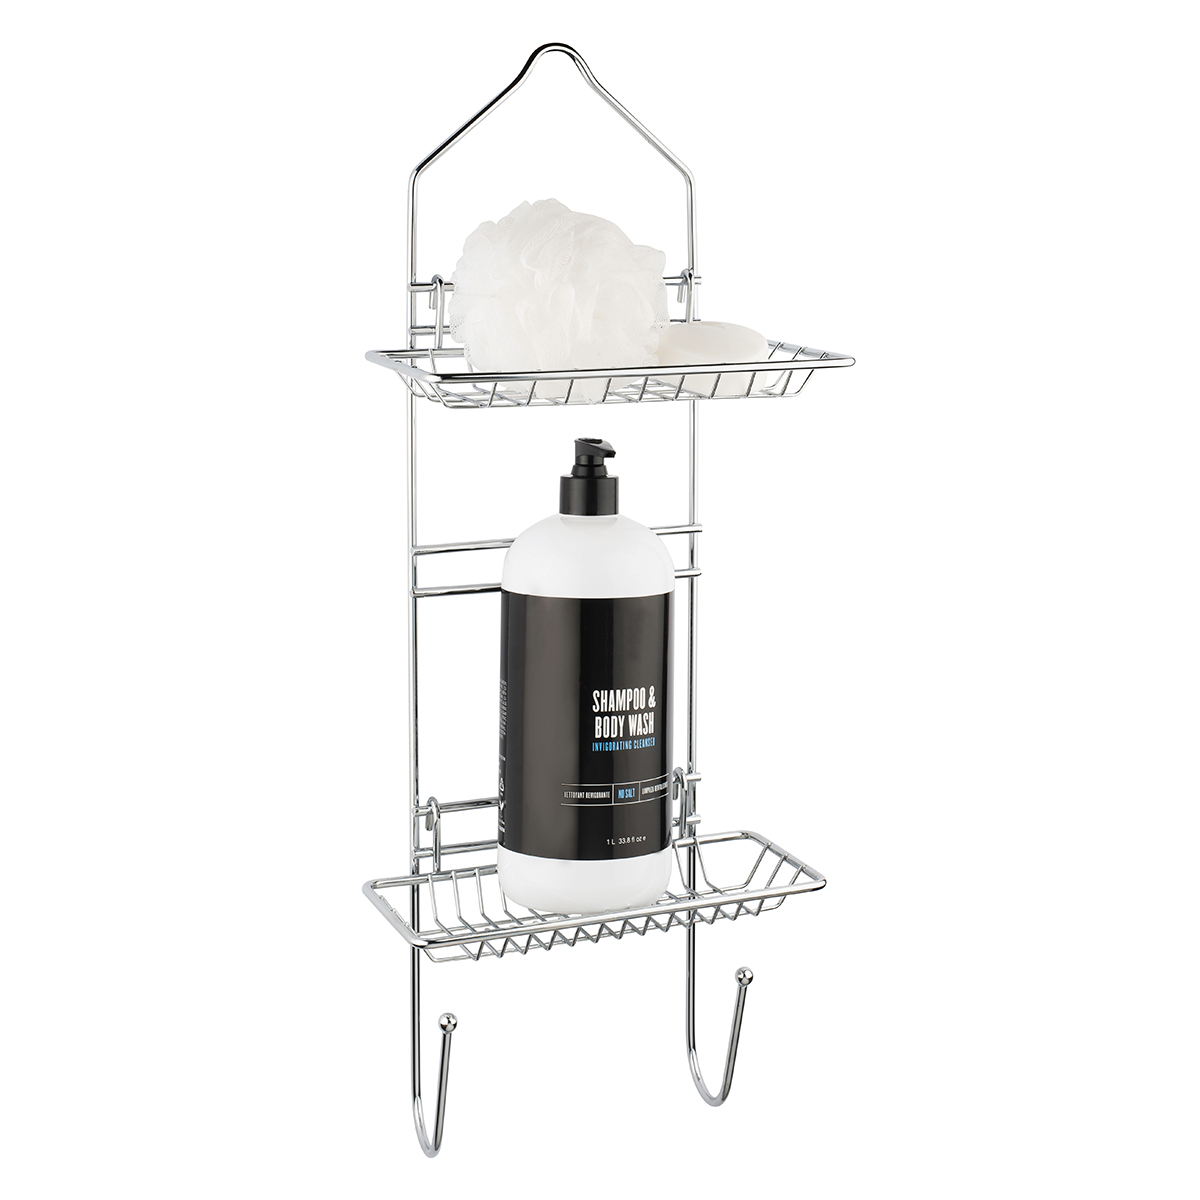 Bath Accents - Reversible Shower Caddy with Adjustable Baskets - Reversible Shower Caddy with Adjustable Baskets - Polished Chrome